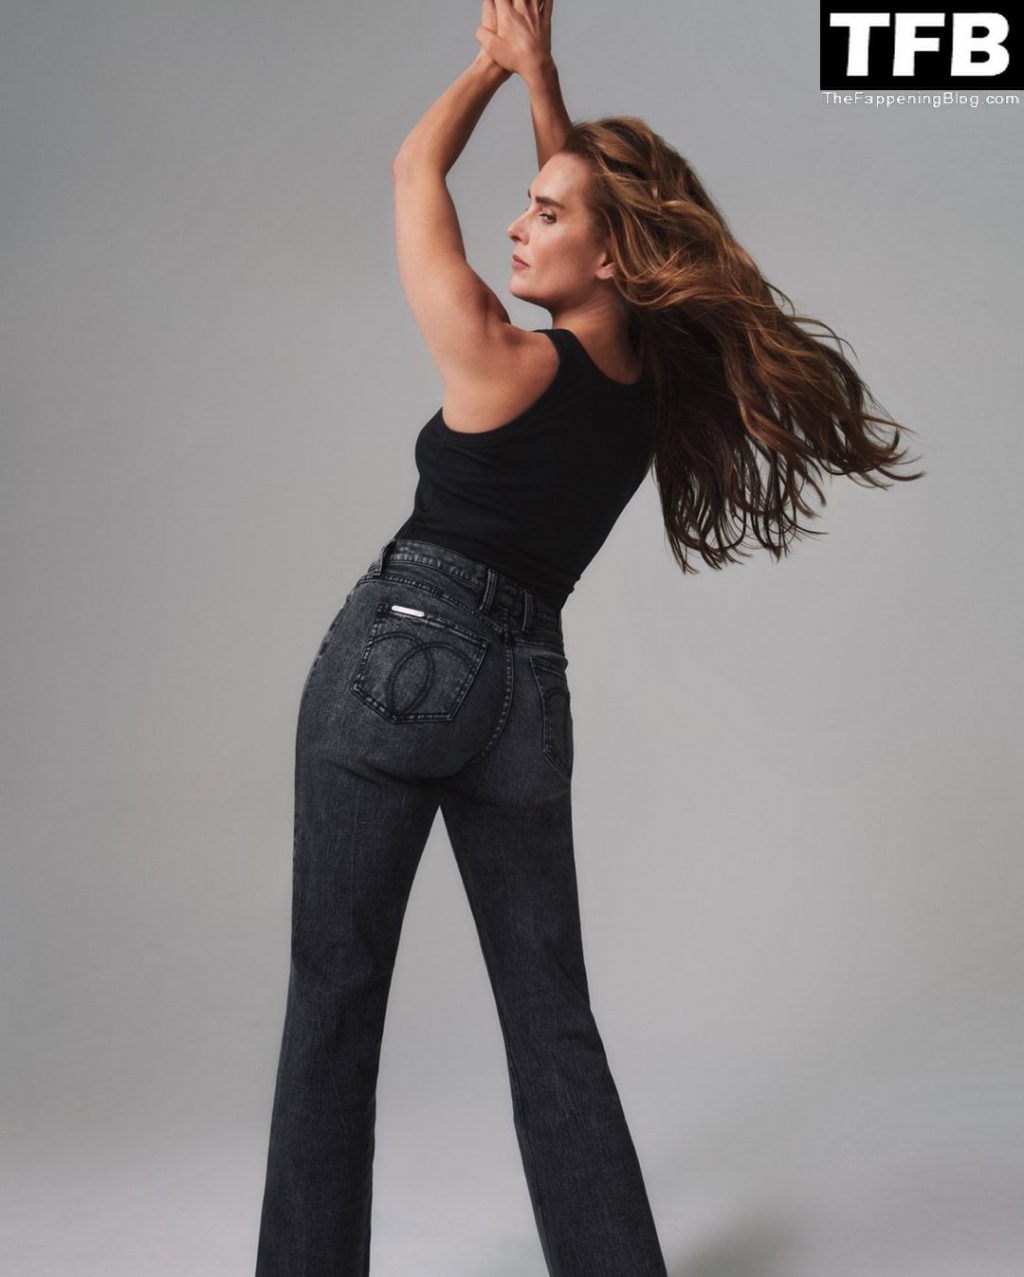 Brooke Shields Goes Topless For Jordache Jeans (6 Photos)